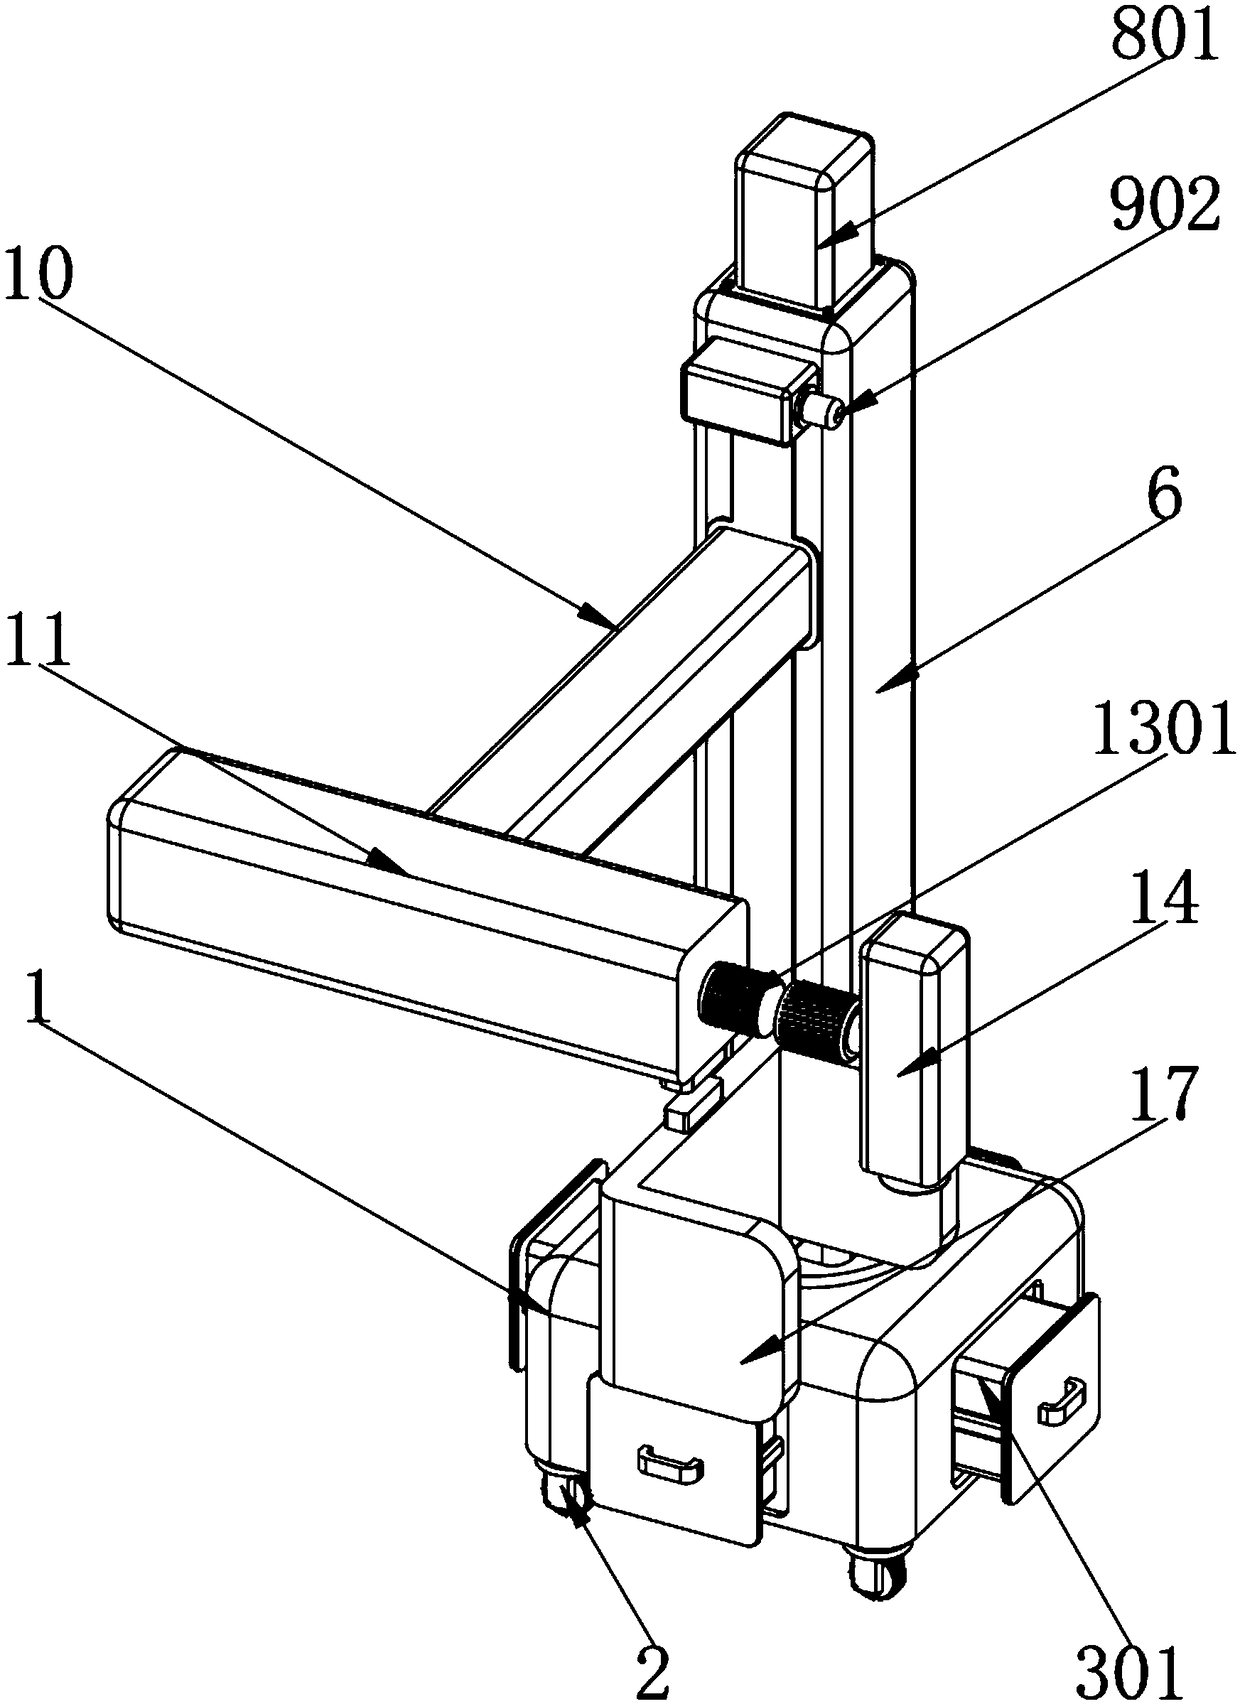 Improved welding head fixing device